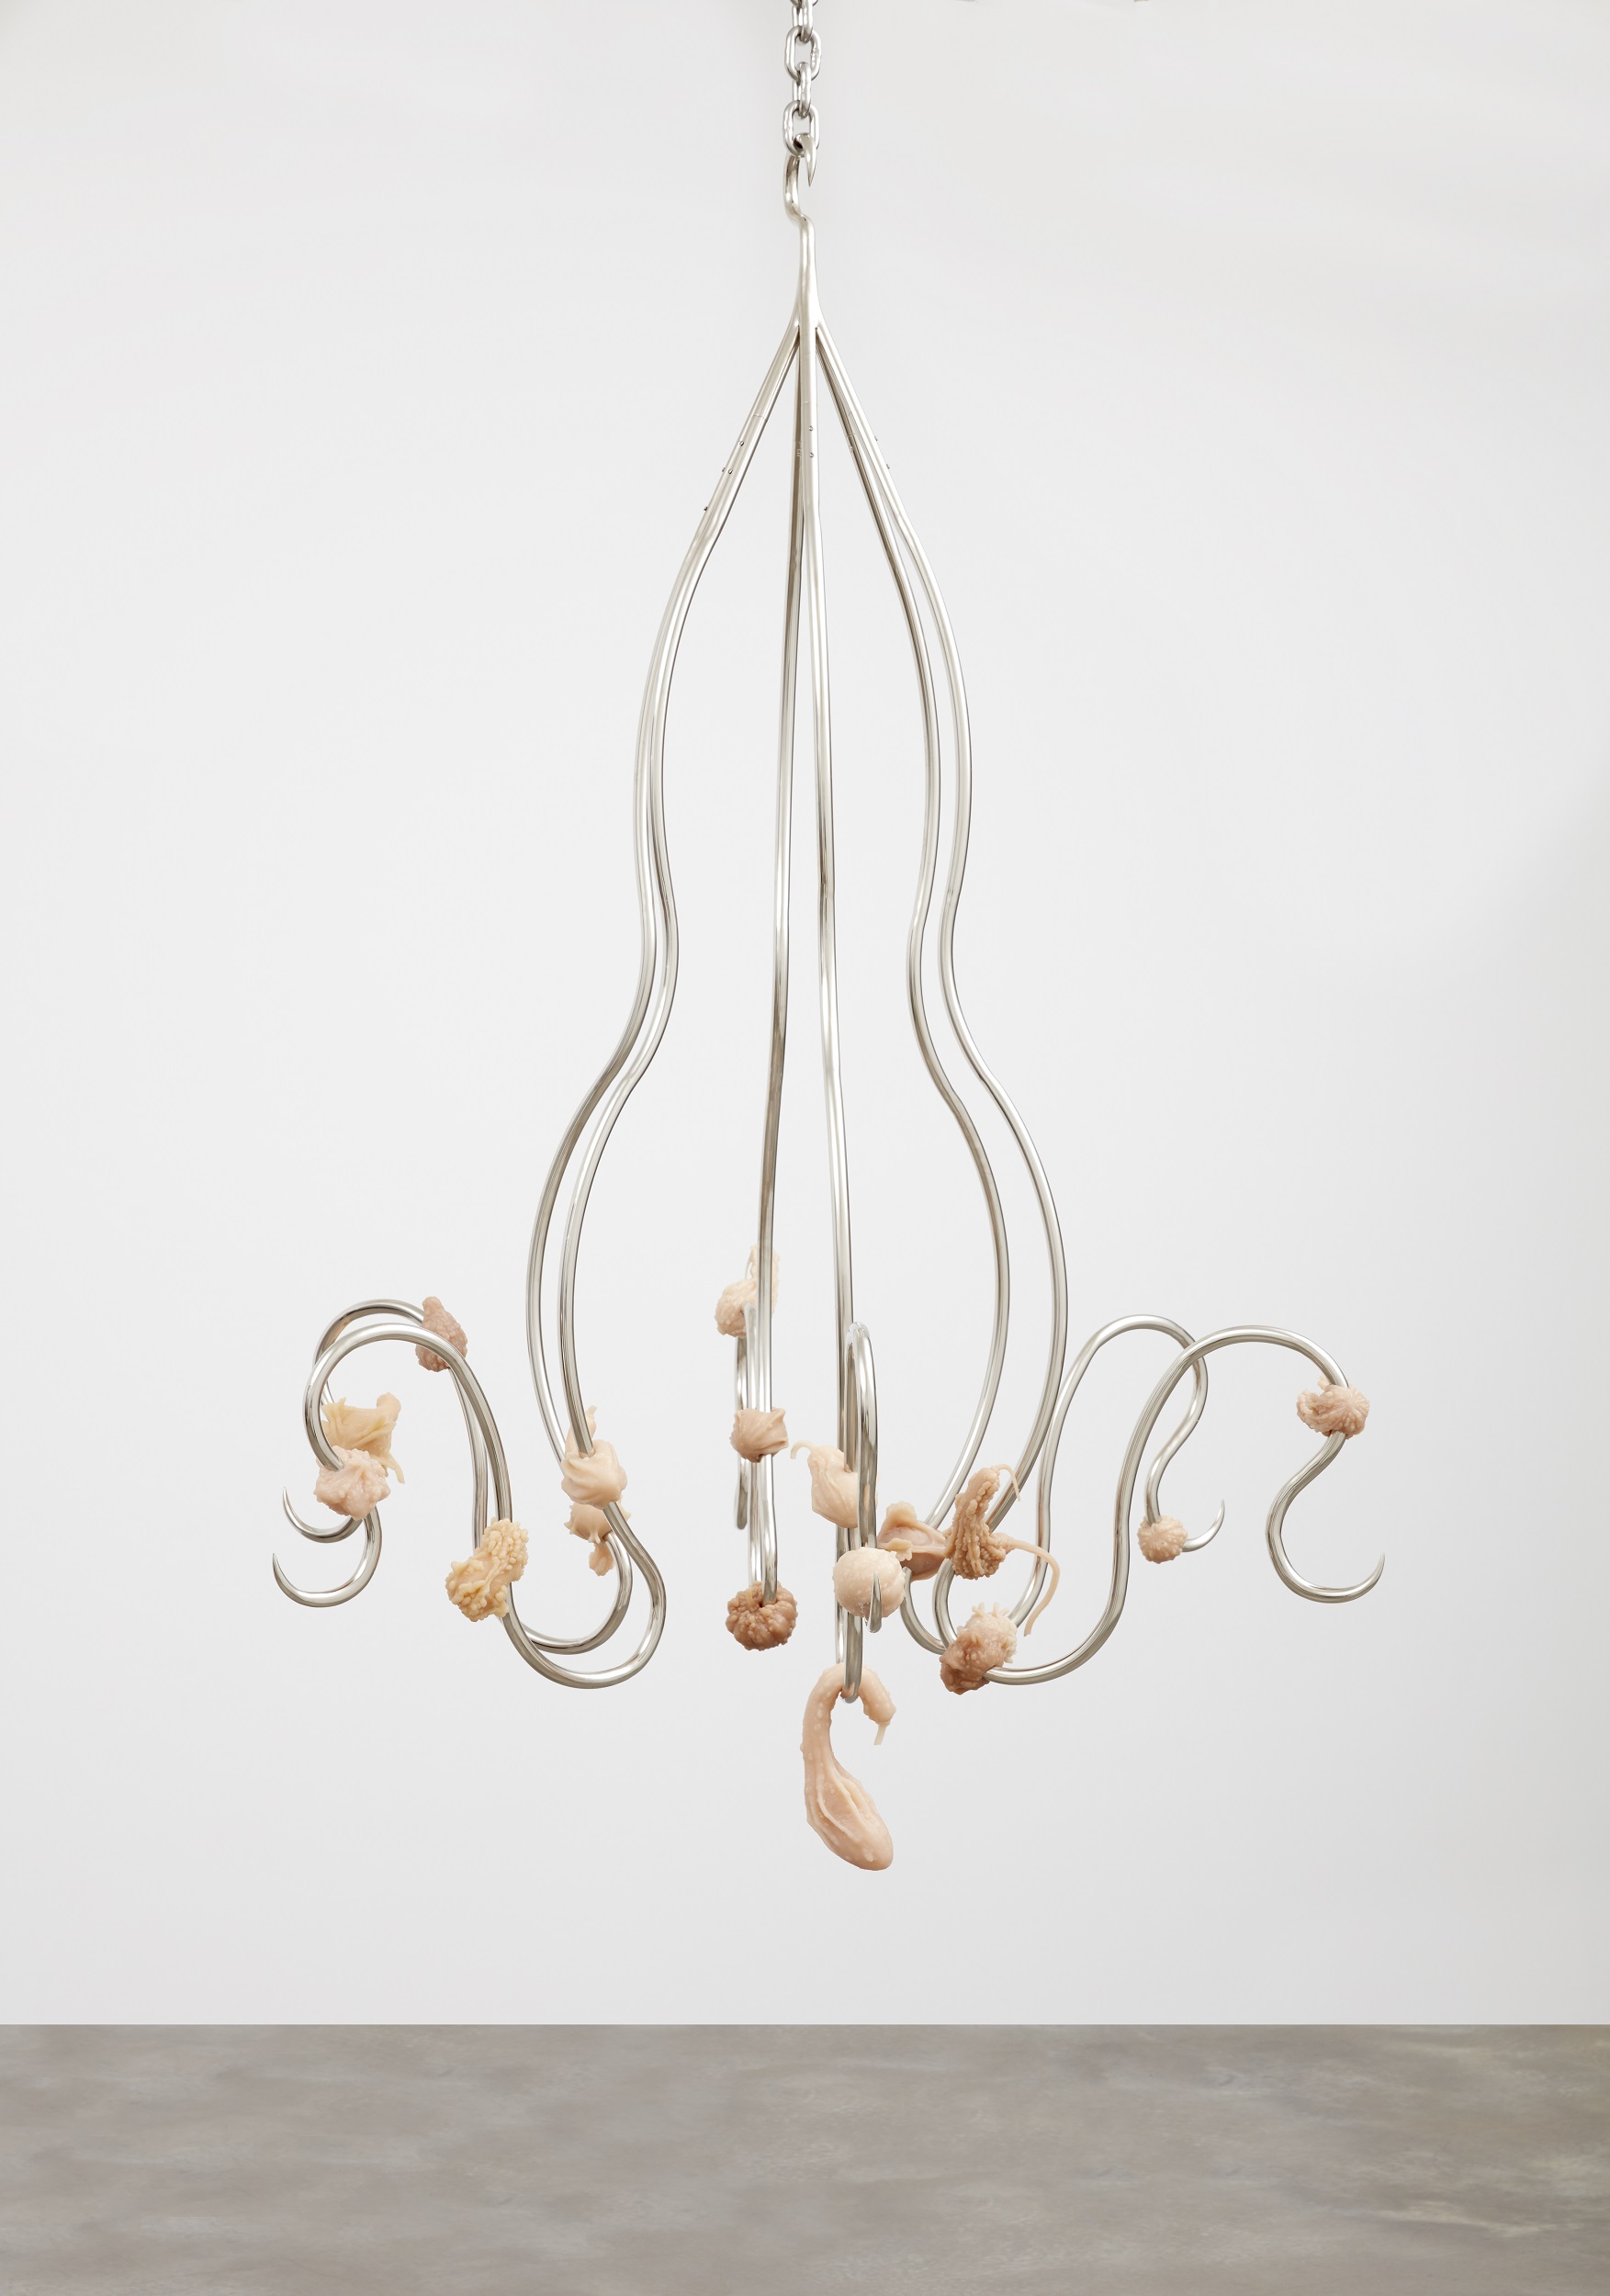 Hanging sculpture in the basic form of a chandelier; instead of lights, irregular pieces of fleshy silicone hang from the ends.